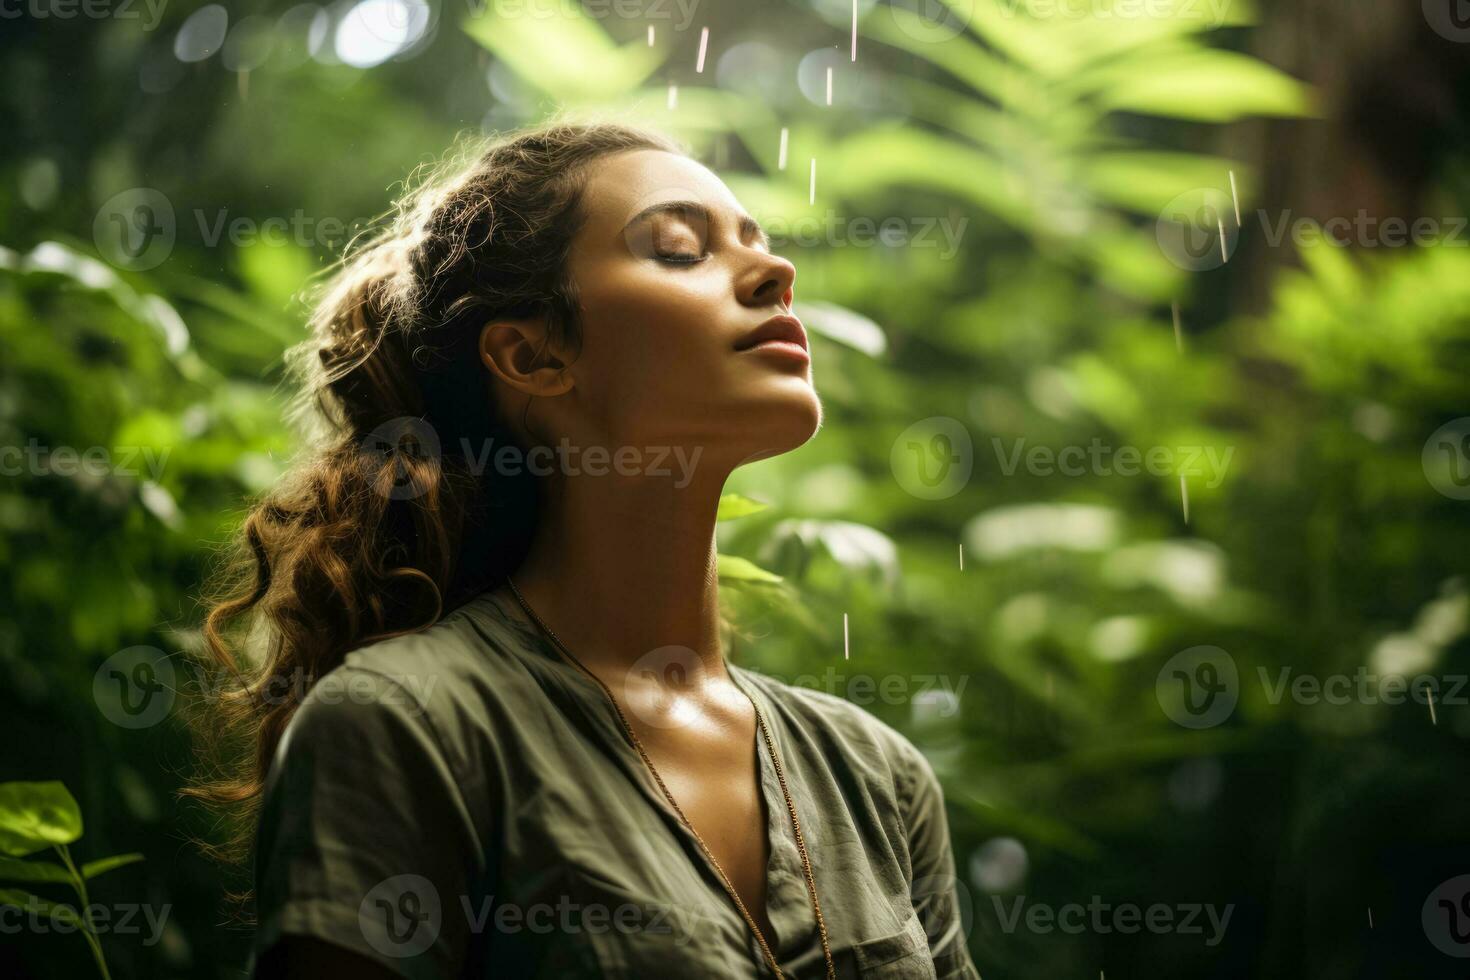 Under a canopy of leaves a person practices mindful breathing feeling the earth's energy a connection to nature for World Mental Health Day photo